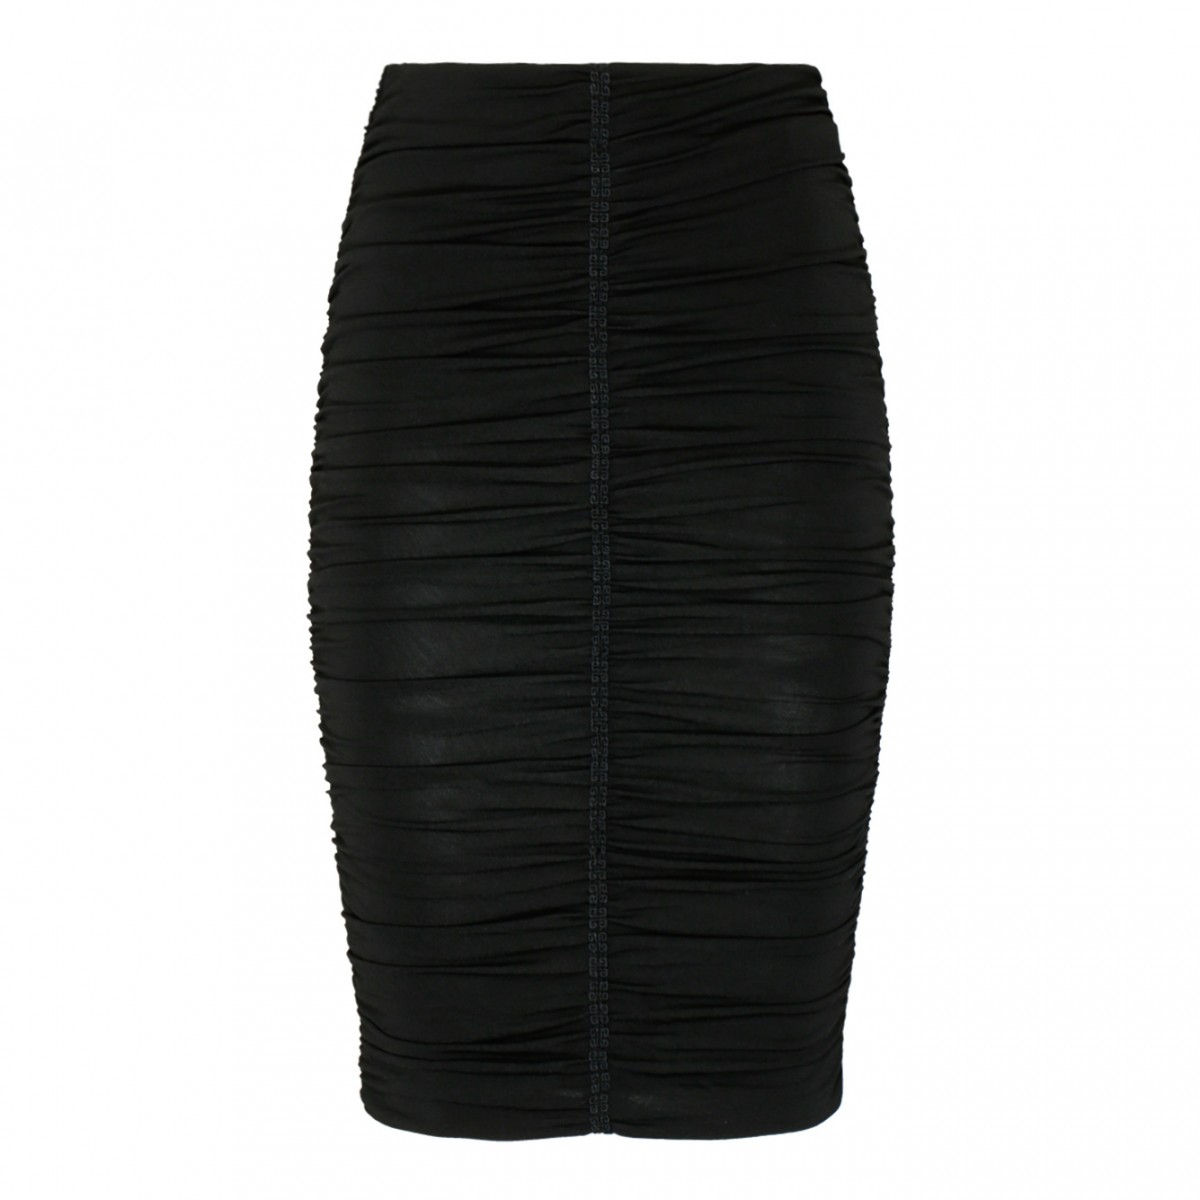 Givenchy Black Ruched Skirt.